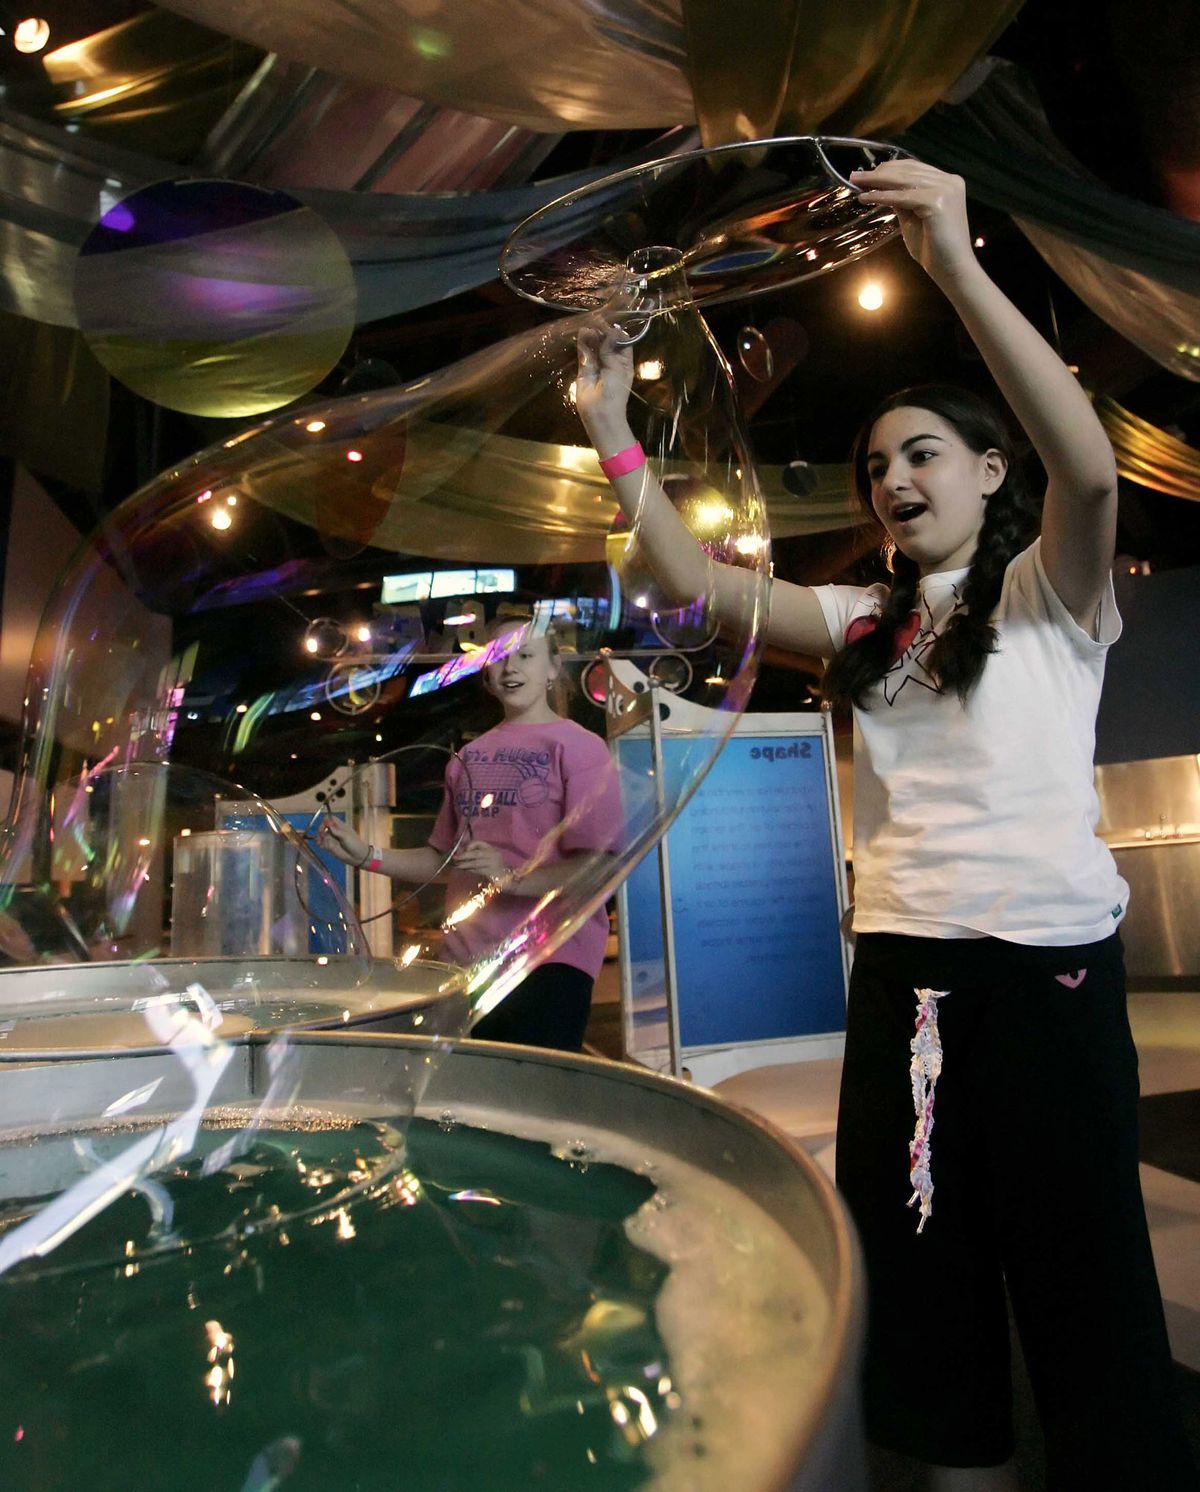 Alicia Carlson, 13, of Bloomfield Hills, Mich., left, and Nicole Farida, 13, of West Bloomfield, Mich.,  play in the bubbles display as they learn about surface tension in 2006 at  what is now called Imagination Station in Toledo, Ohio. (Toledo) Blade (Dave Zapotosky (Toledo) Blade)